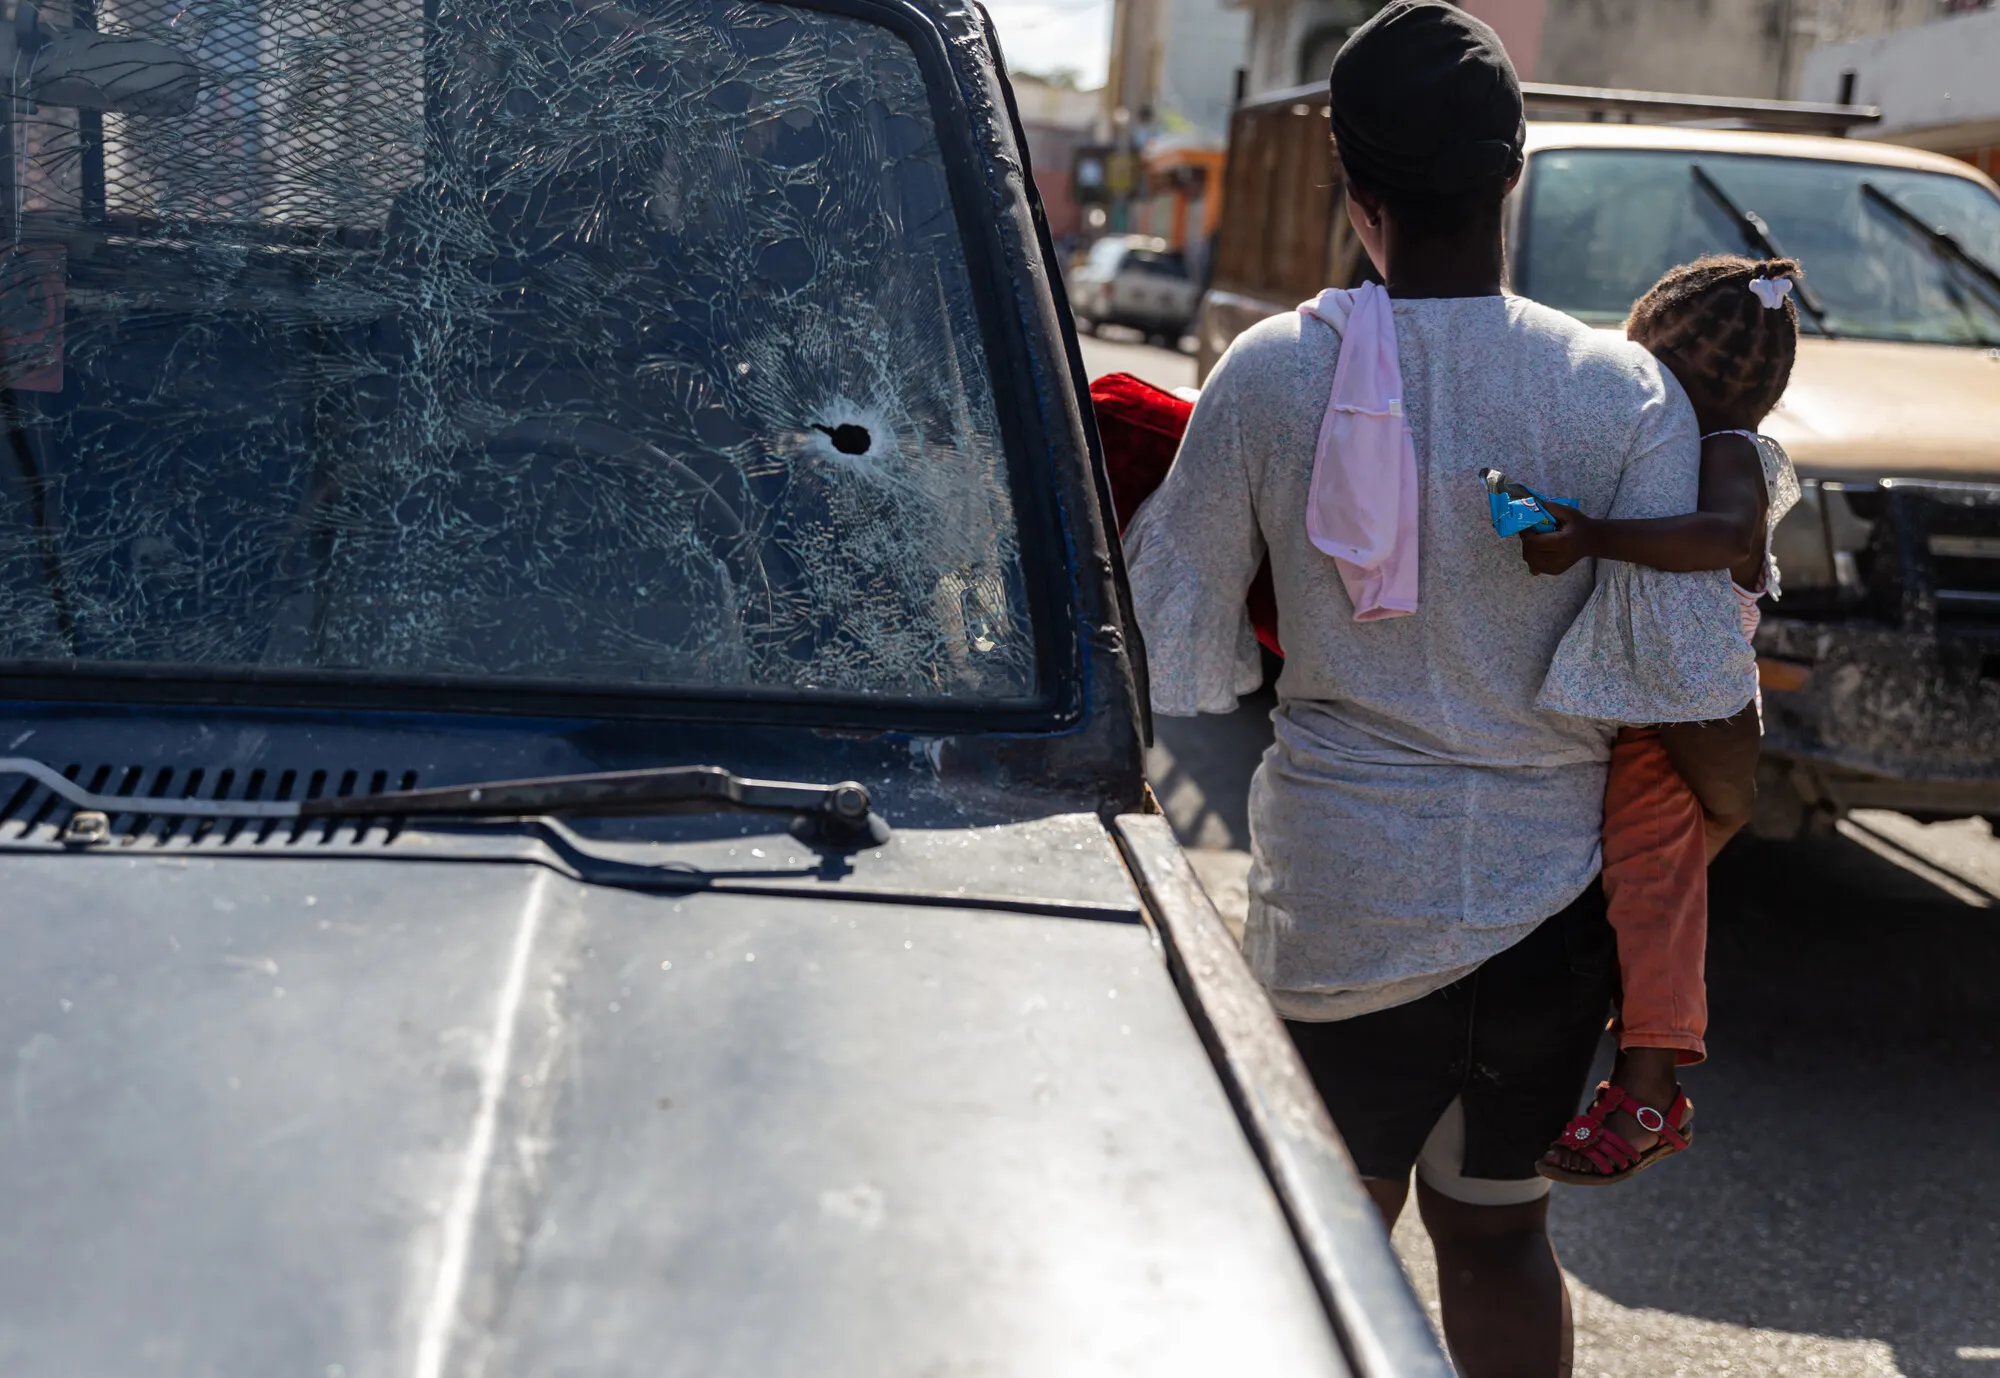 A woman holds a child outdoors, back to camera, next to a car with a bullet hole in the windshield.